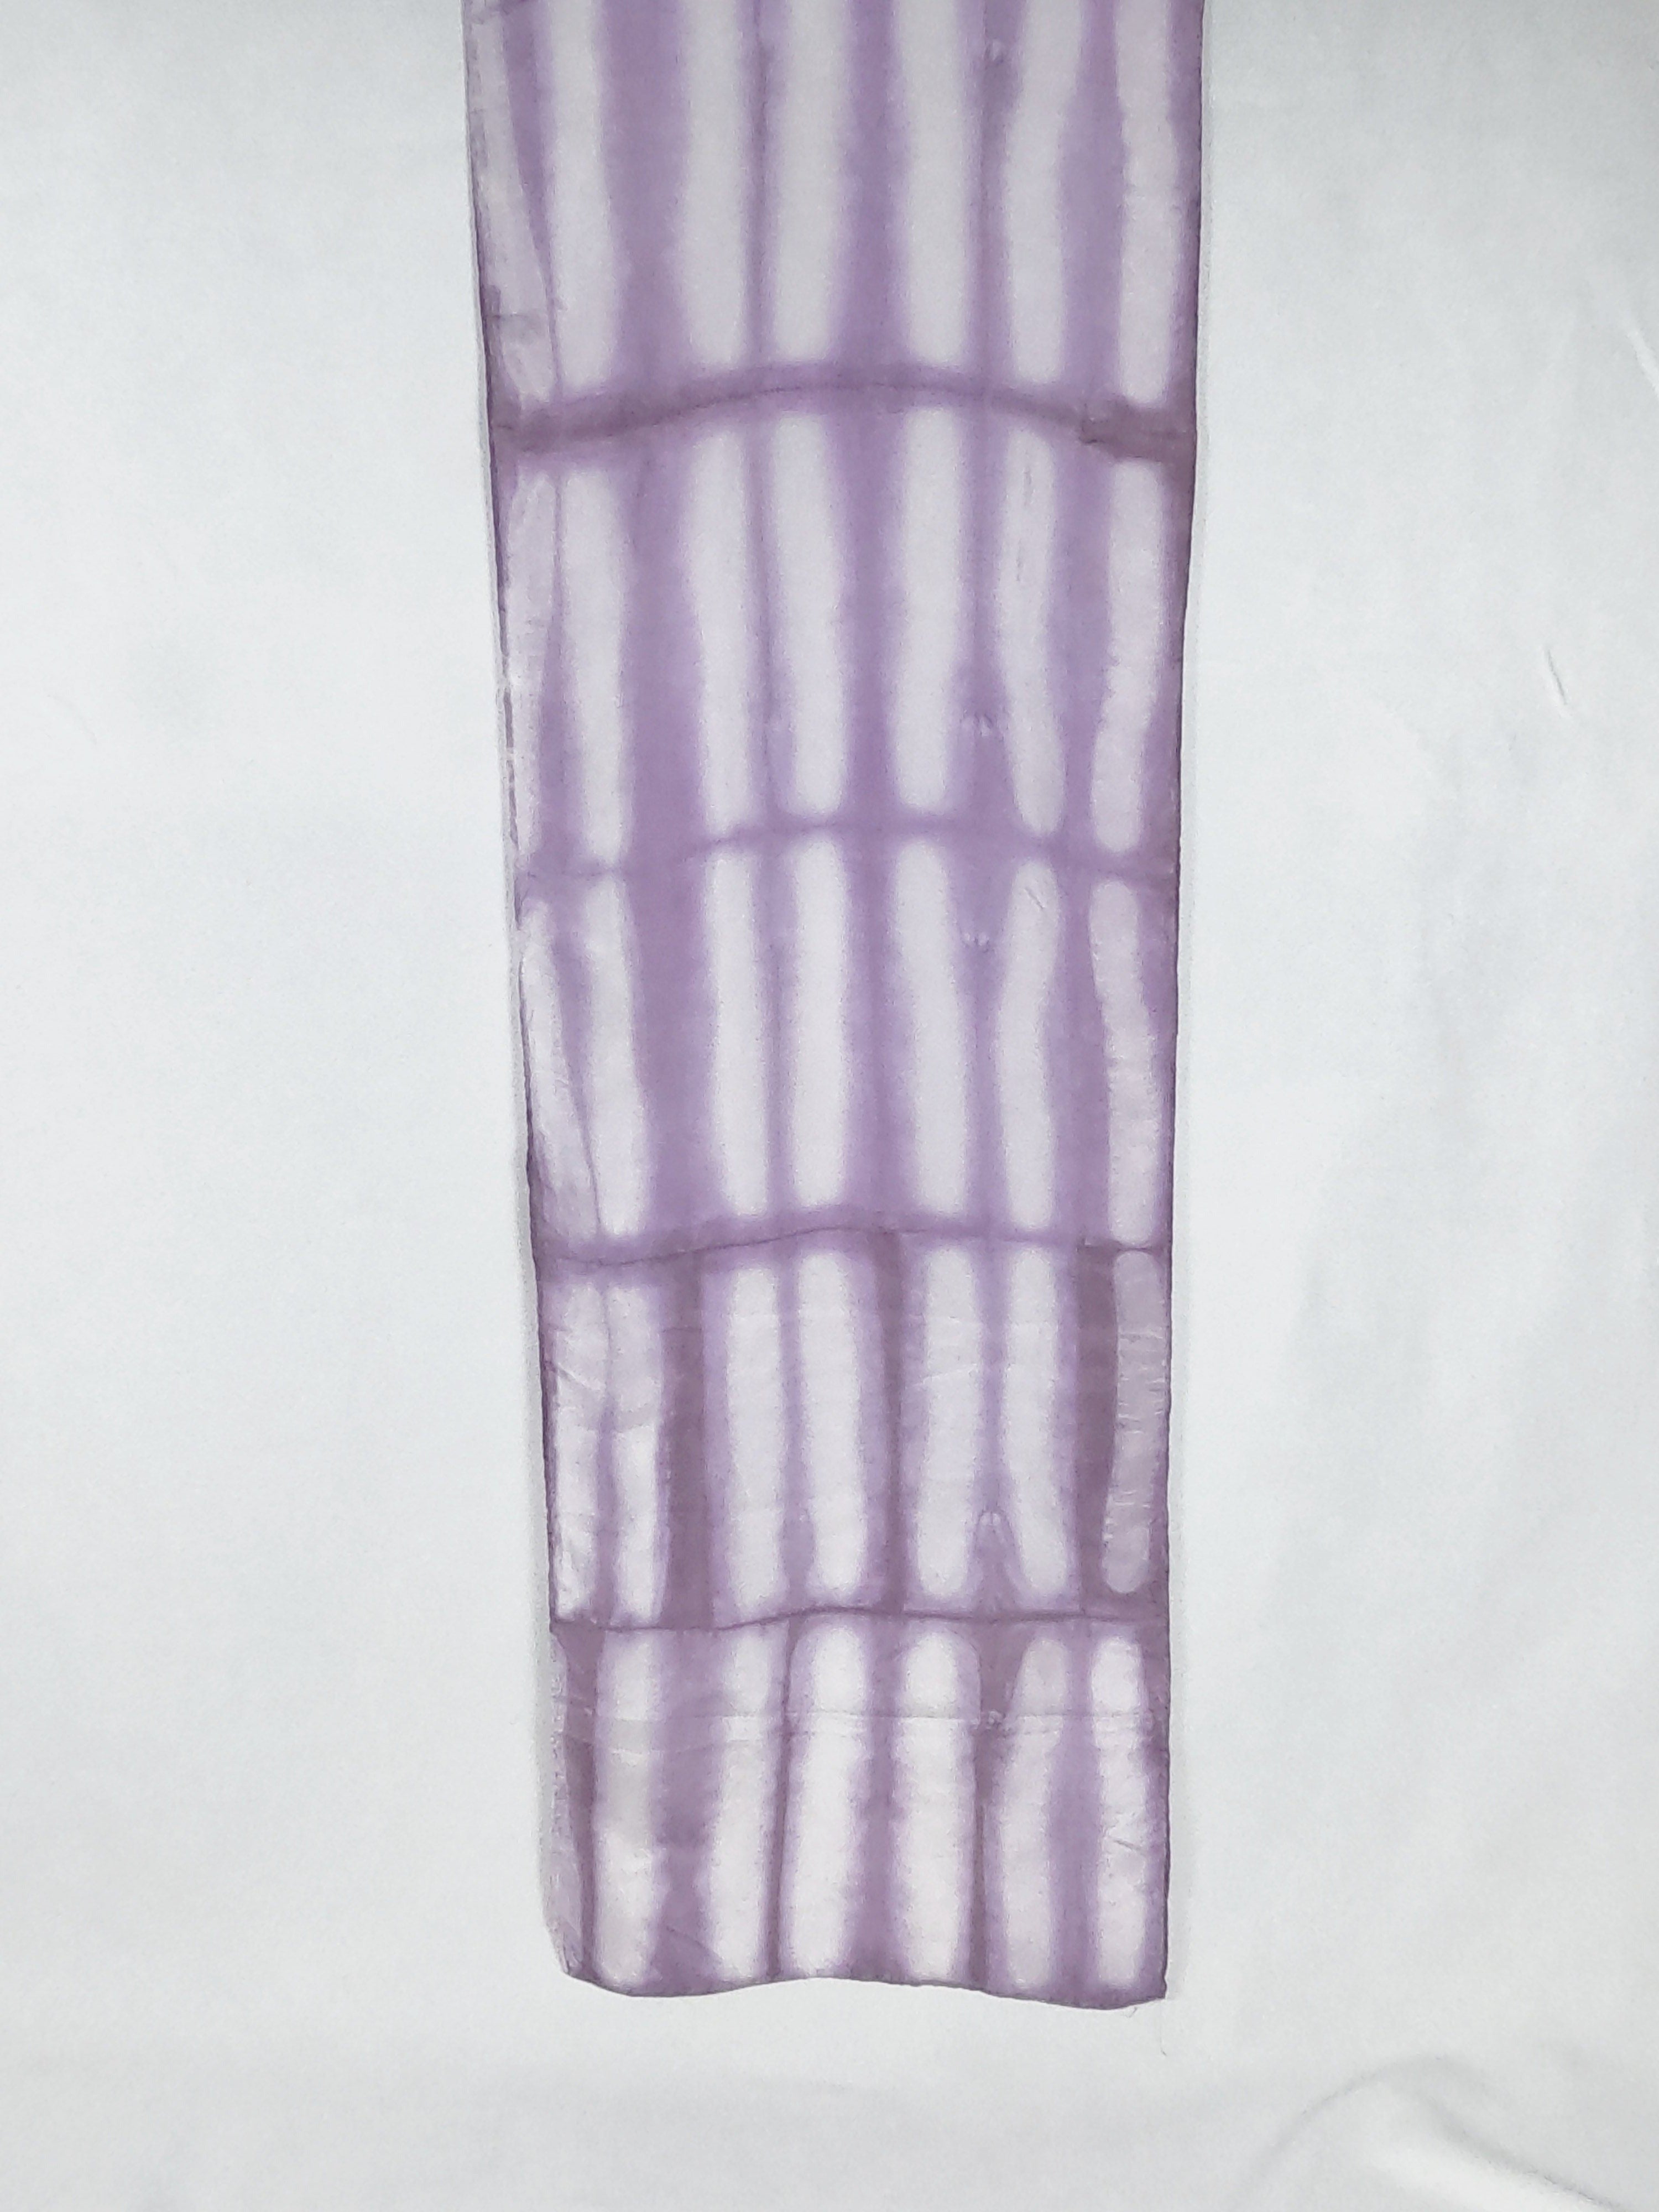 A light lavender coloured scarf laid flat to reveal the full motif. It is long white stripes.